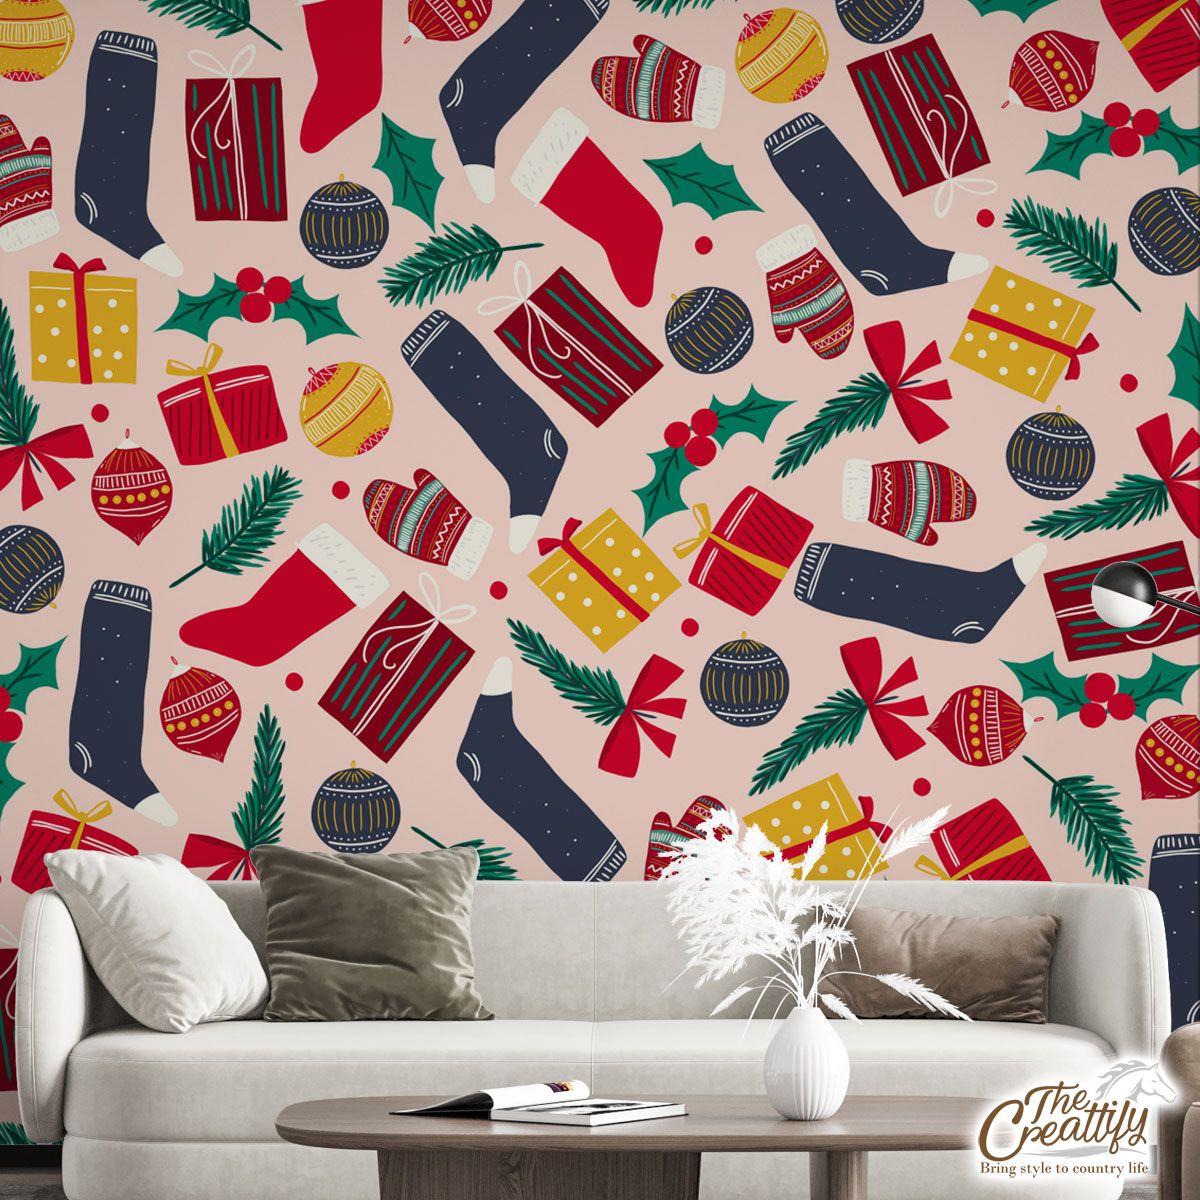 Happy Christmas With Full Of Red Socks, Christmas Balls, Gifts, Holly Left And Wool Gloves Pattern Wall Mural